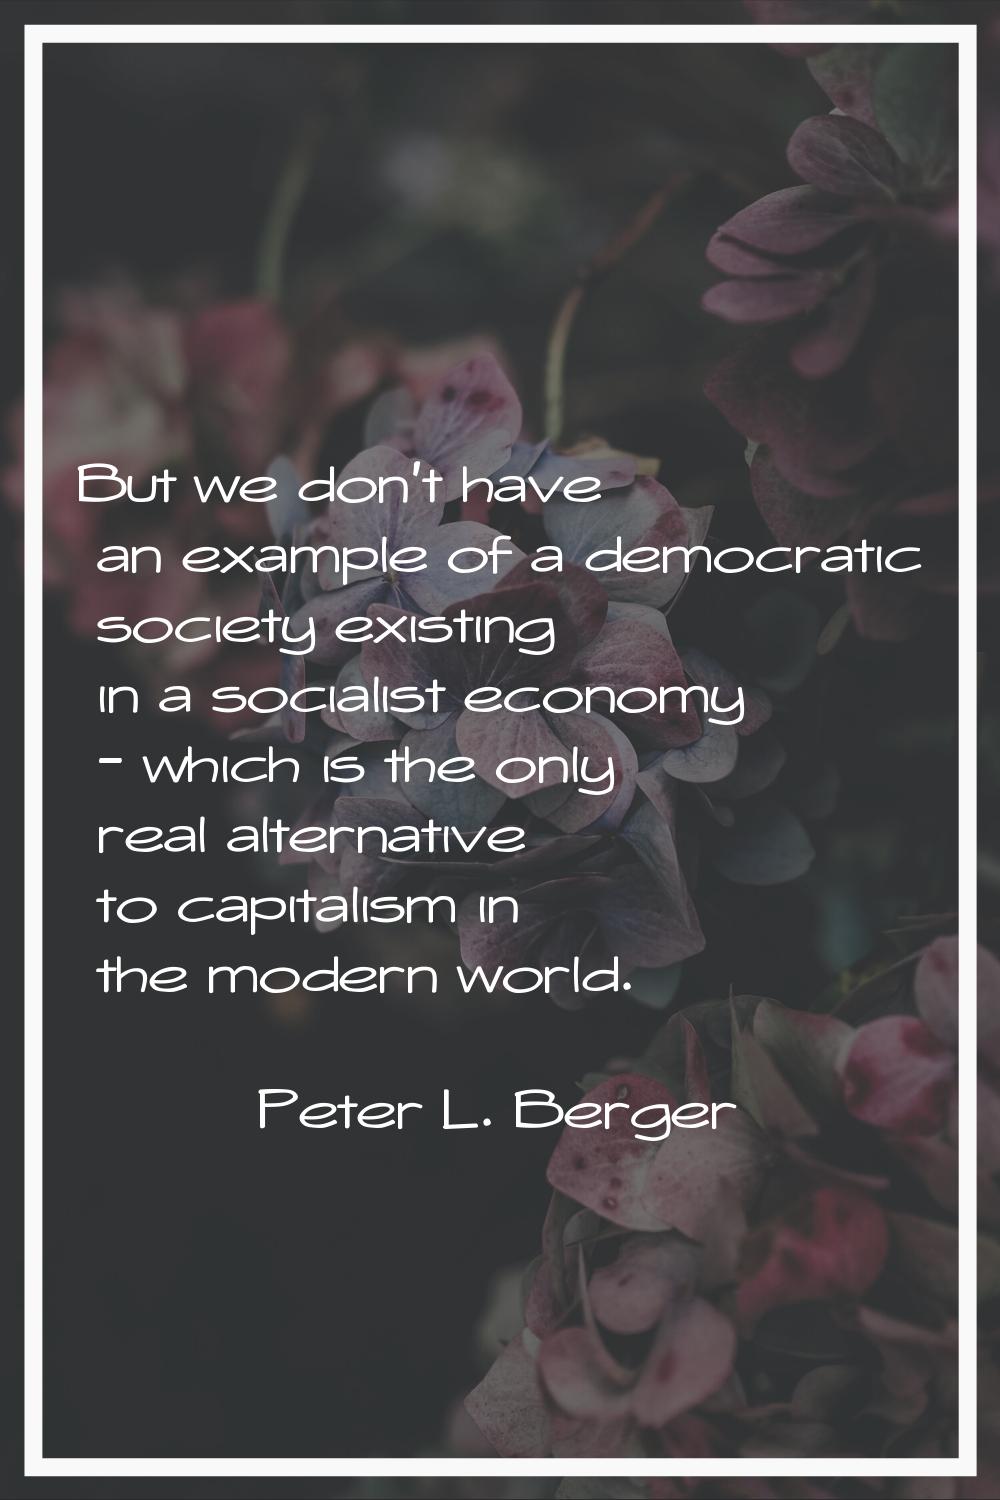 But we don't have an example of a democratic society existing in a socialist economy - which is the